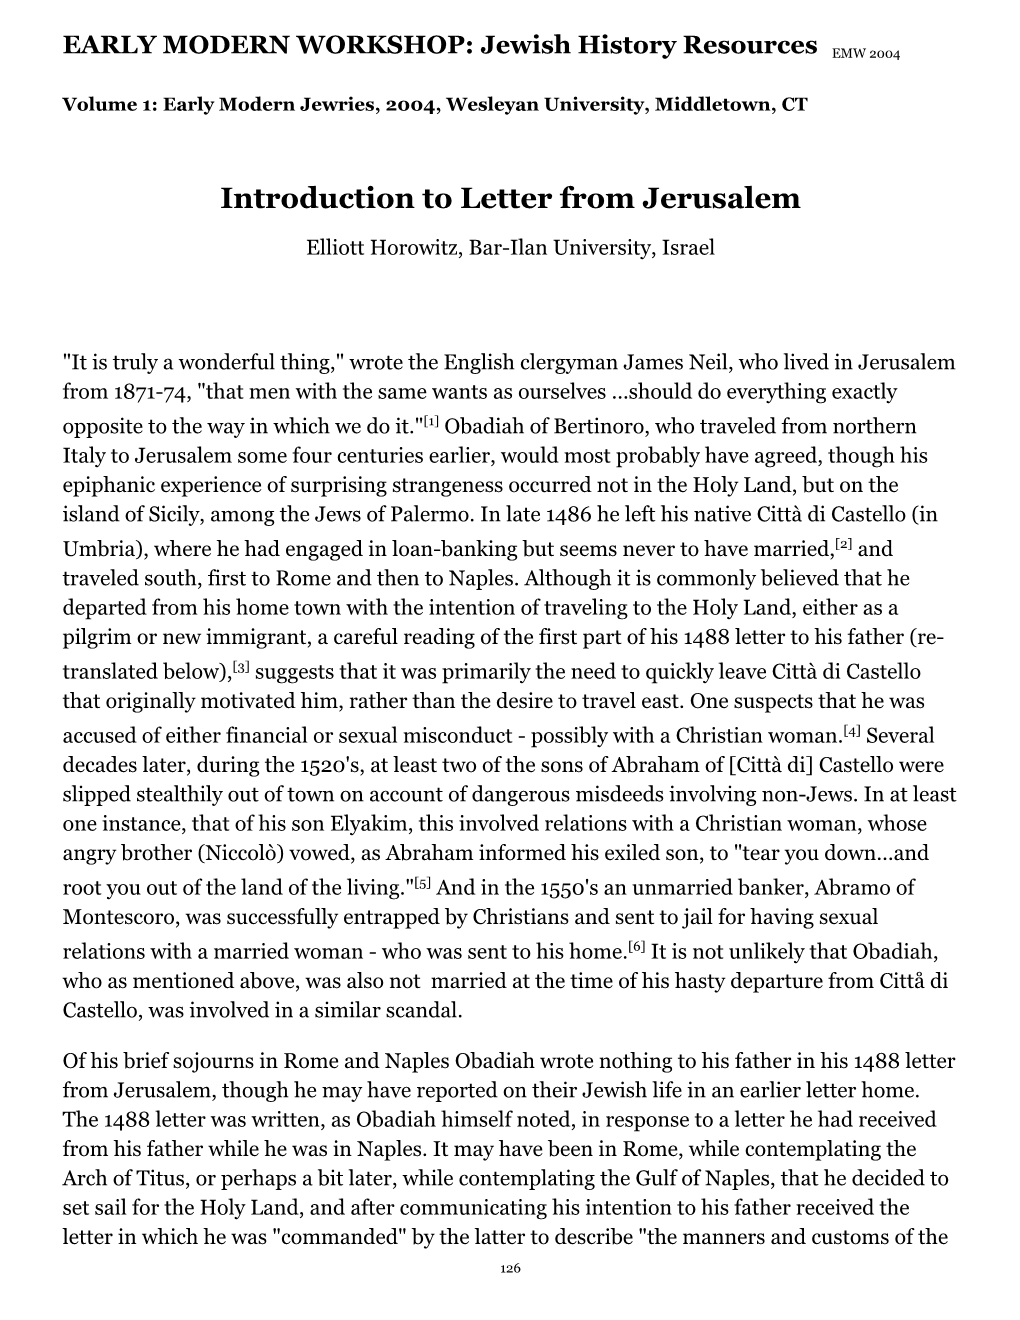 Letter from Jerusalem by Obadiah of Bertinoro